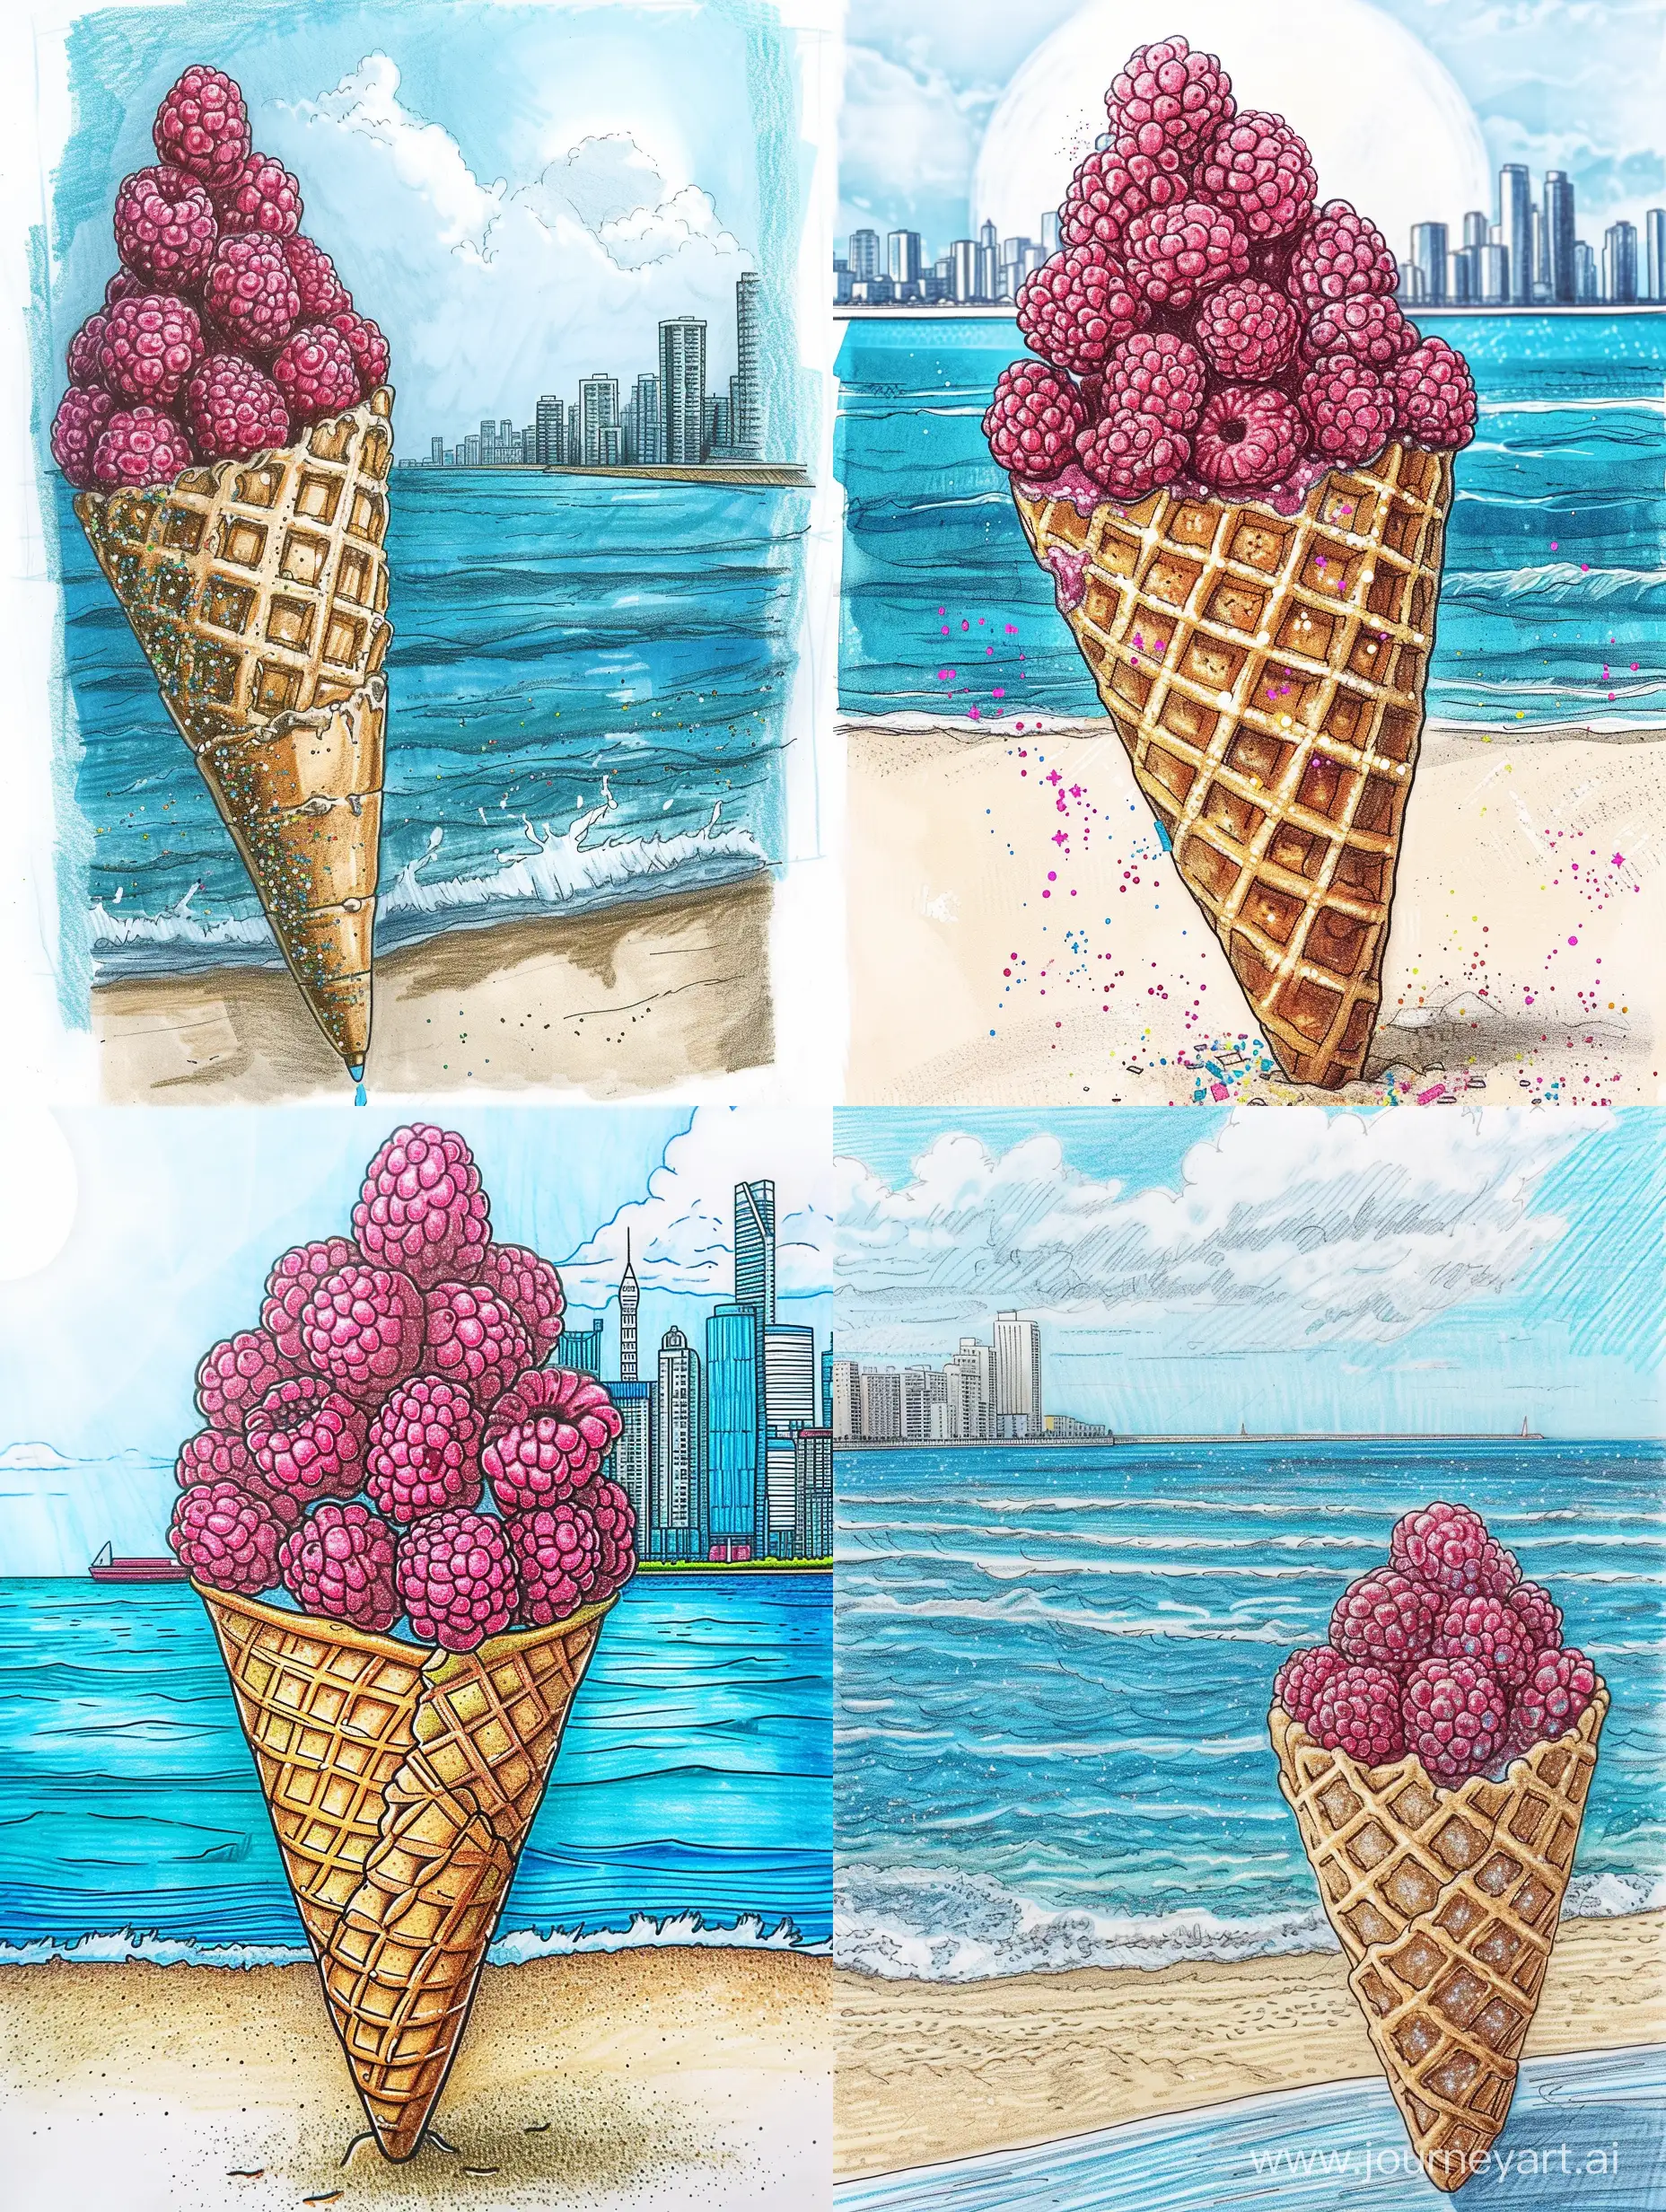 City Sketch Colored pencils, glitter, waffle cone with raspberries against the backdrop of the sea shore the sea sun, summer, drawing for sketchbook, youthful, energetic, elegant, highly detailed, fashionable, ink, don't rob yourself, fantasize yourself, stylized illustration, stroke with black marker, diamonds not drops, glitter, bright rich colors, comic book, city illustration